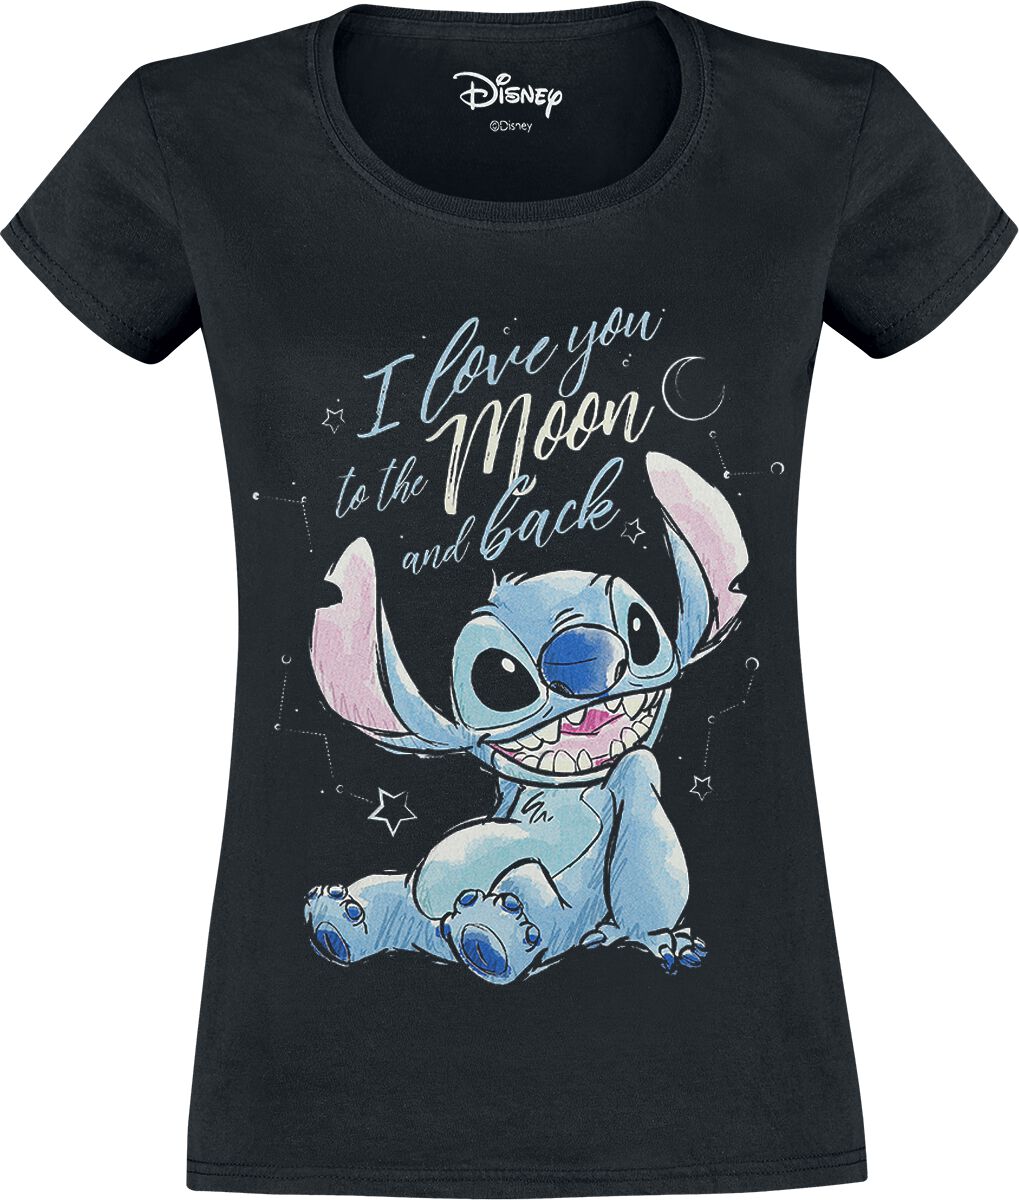 Image of T-Shirt Disney di Lilo & Stitch - I love you to the moon and back - S a XXL - Donna - nero